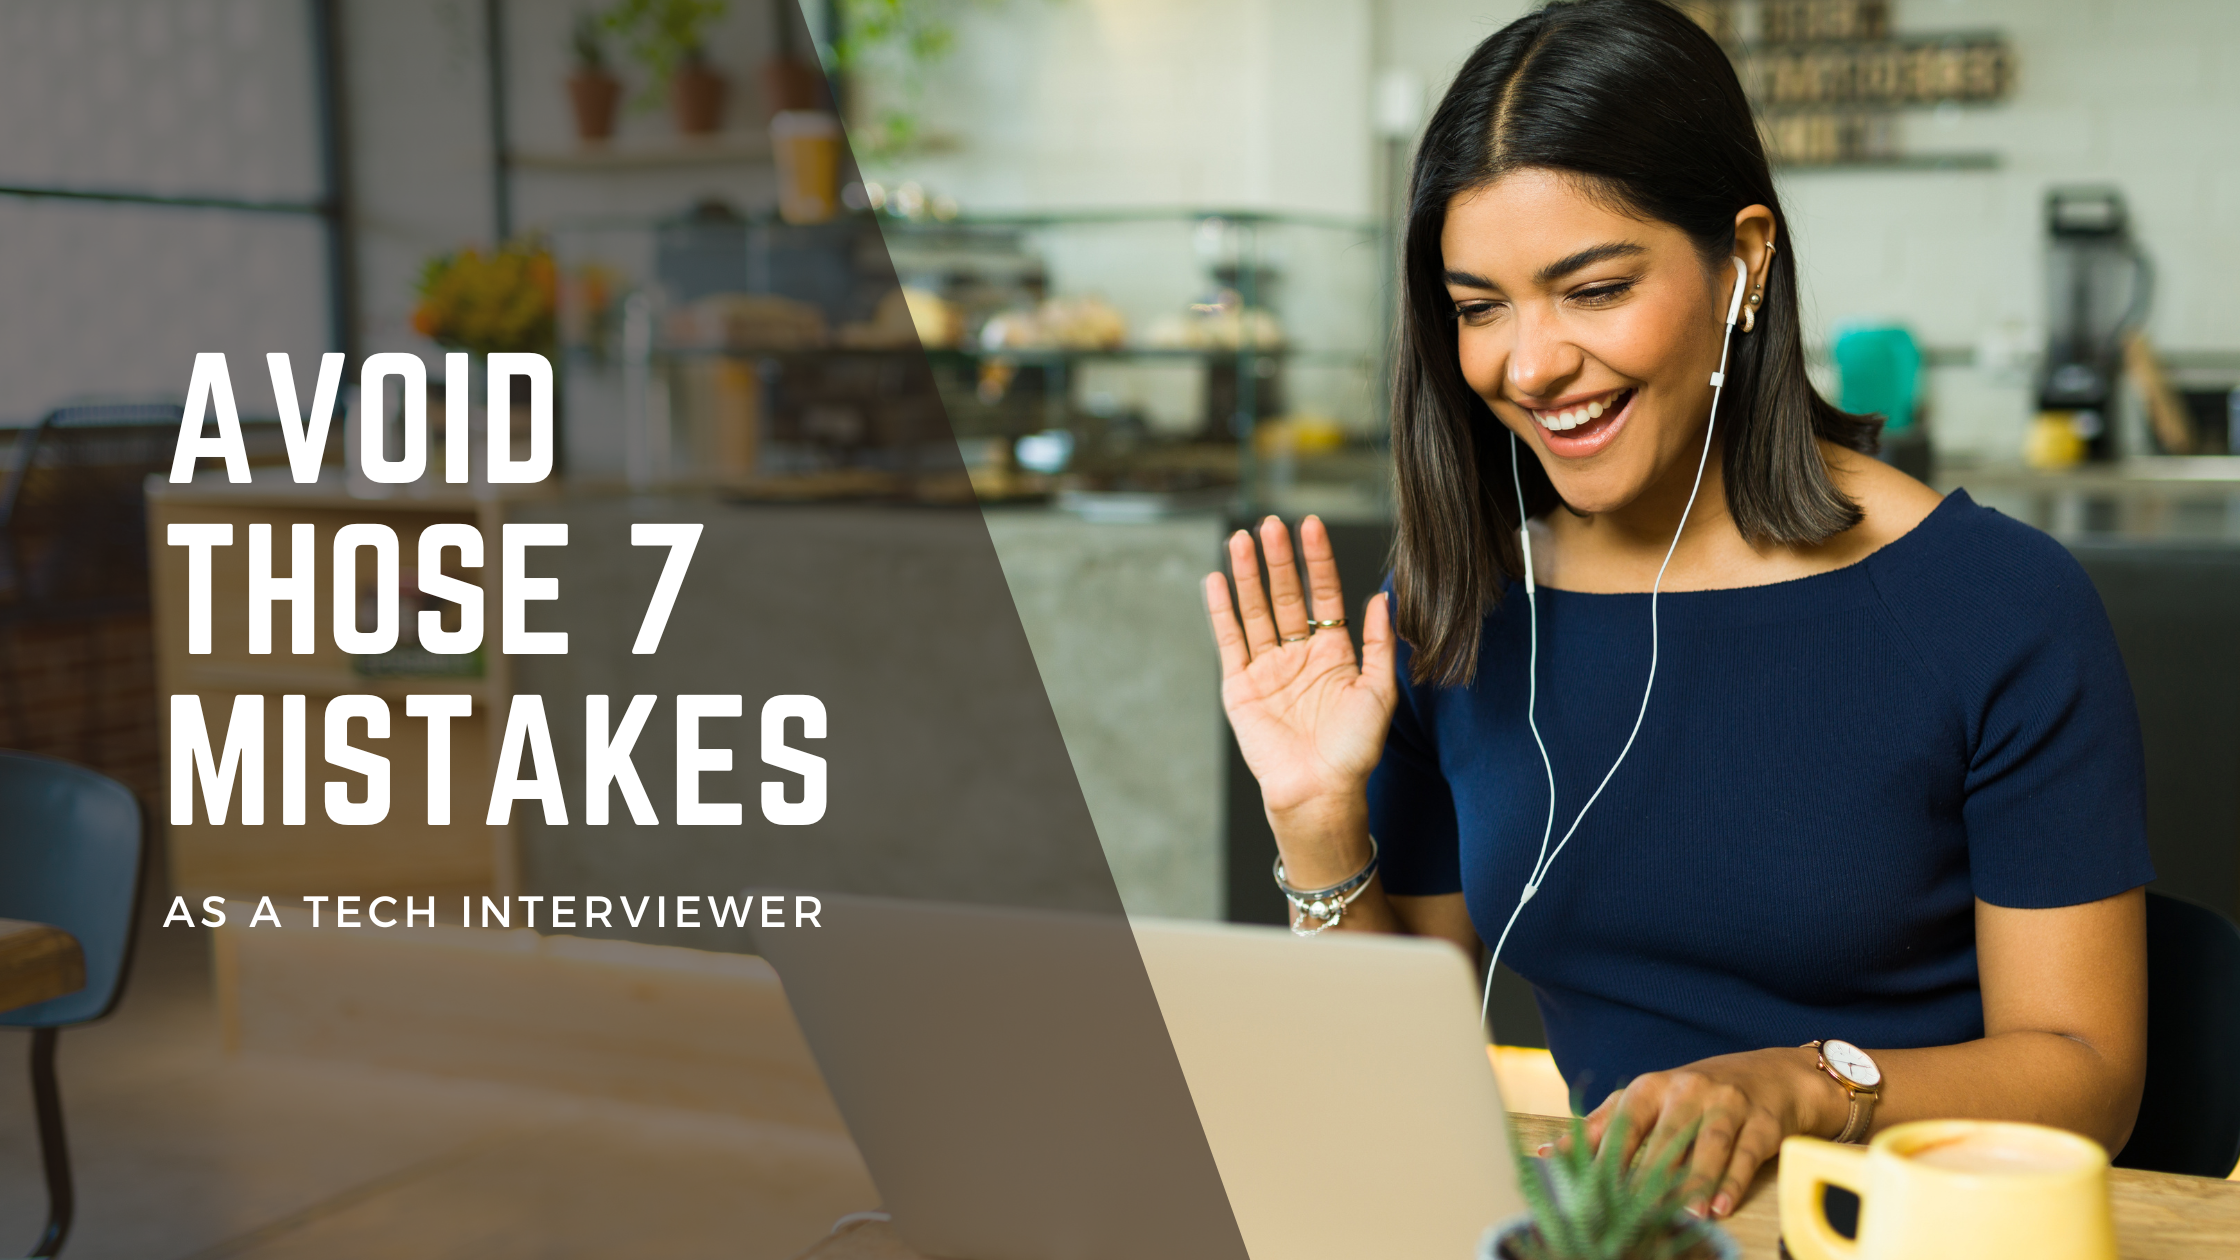 The 7 worst mistakes to make as an interviewer while recruiting